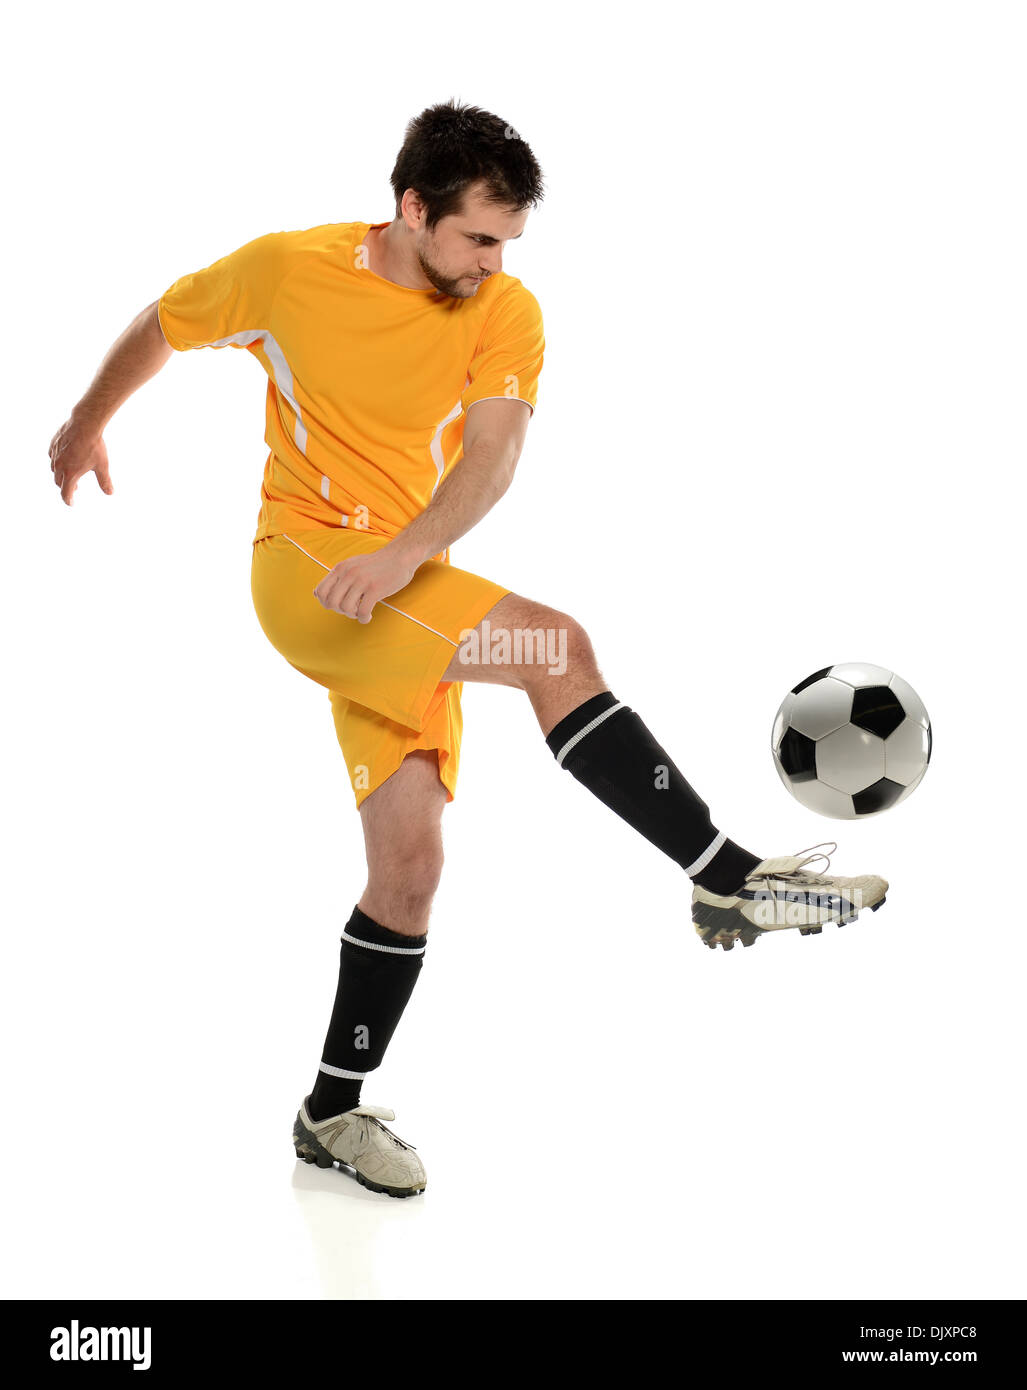 Soccer player kicking ball isolé sur fond blanc Banque D'Images